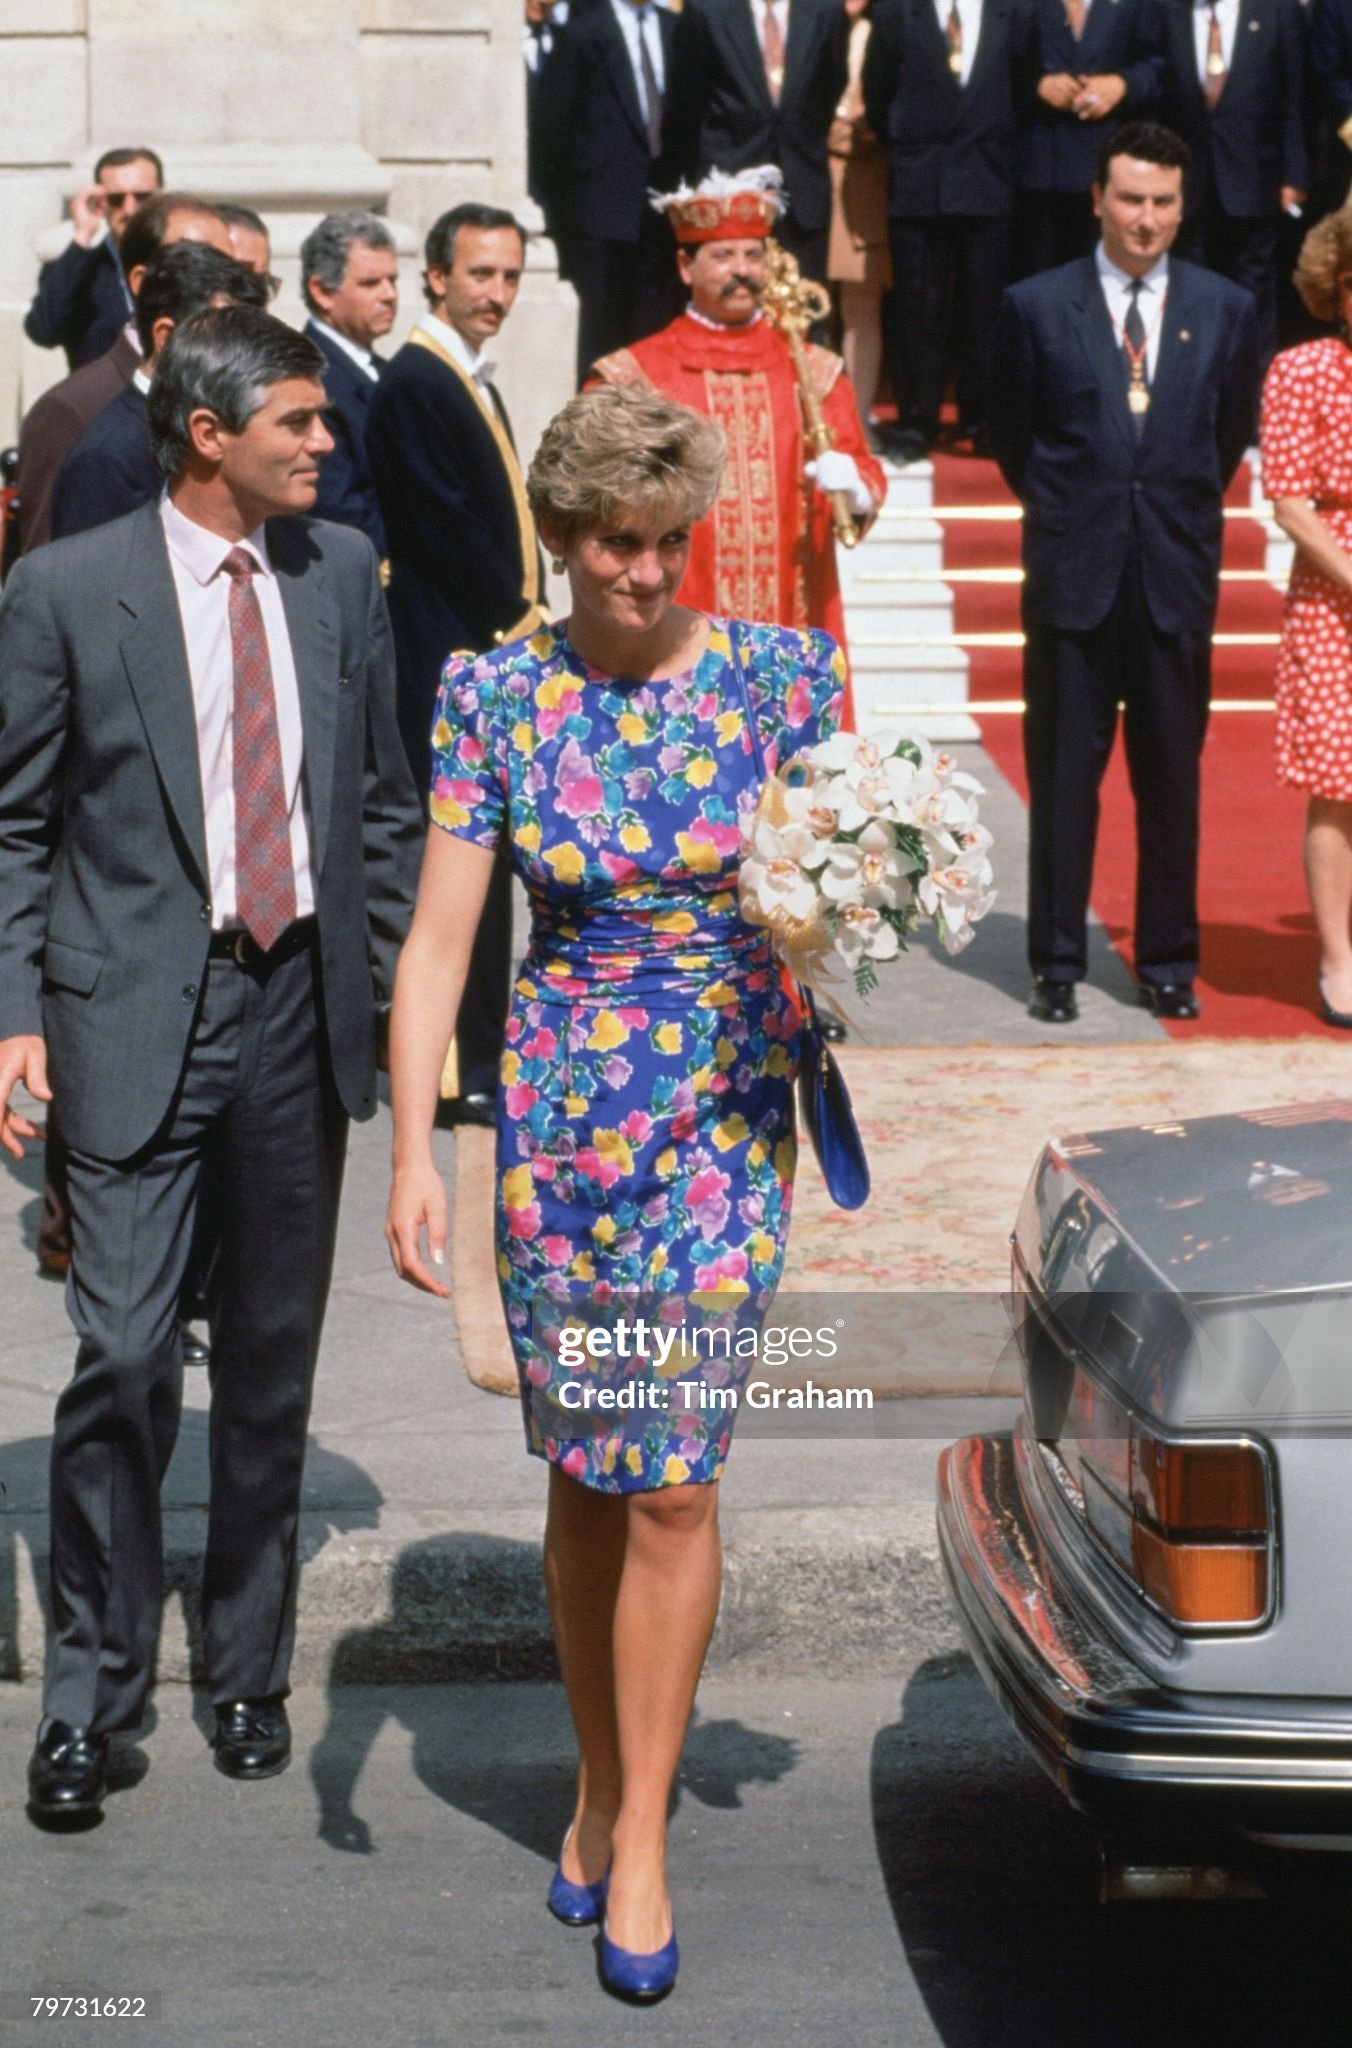 diana-princess-of-wales-outside-the-town-hall-in-seville-with-bodyguard-colin-trimming-she-is.jpg